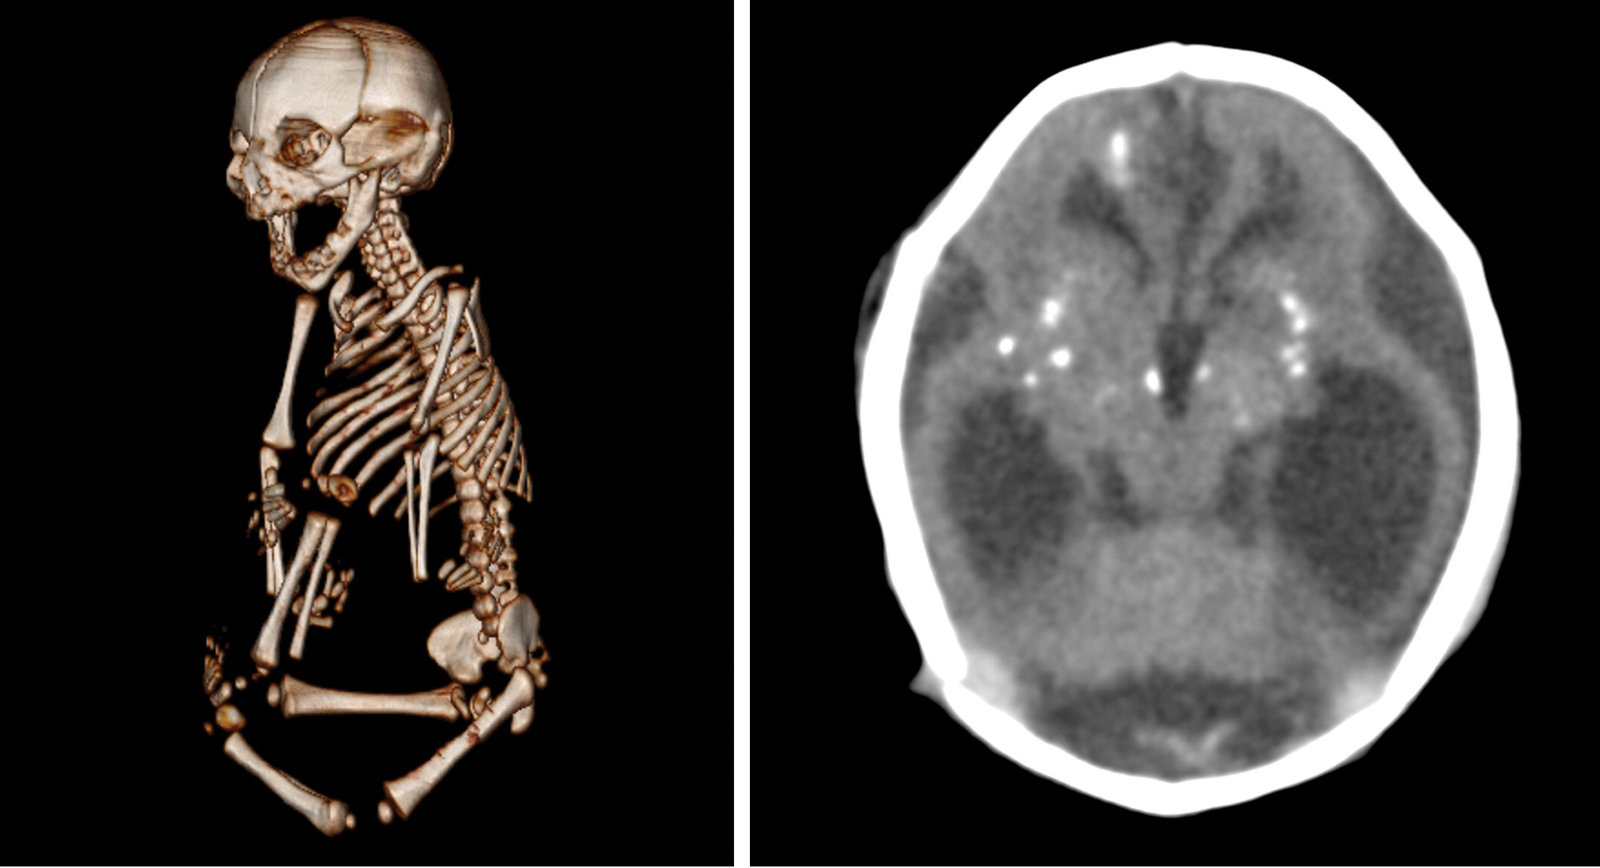 Zika infections during gestation can damage other parts of the body besides the brain. In this case, the baby was born with severe stiffness in the joints, which keeps the baby from straightening arms and legs normally. The baby's brain shows the telltale sign of an infection: white dots called calcification. (Photo courtesy of the Radiological Society of North America)